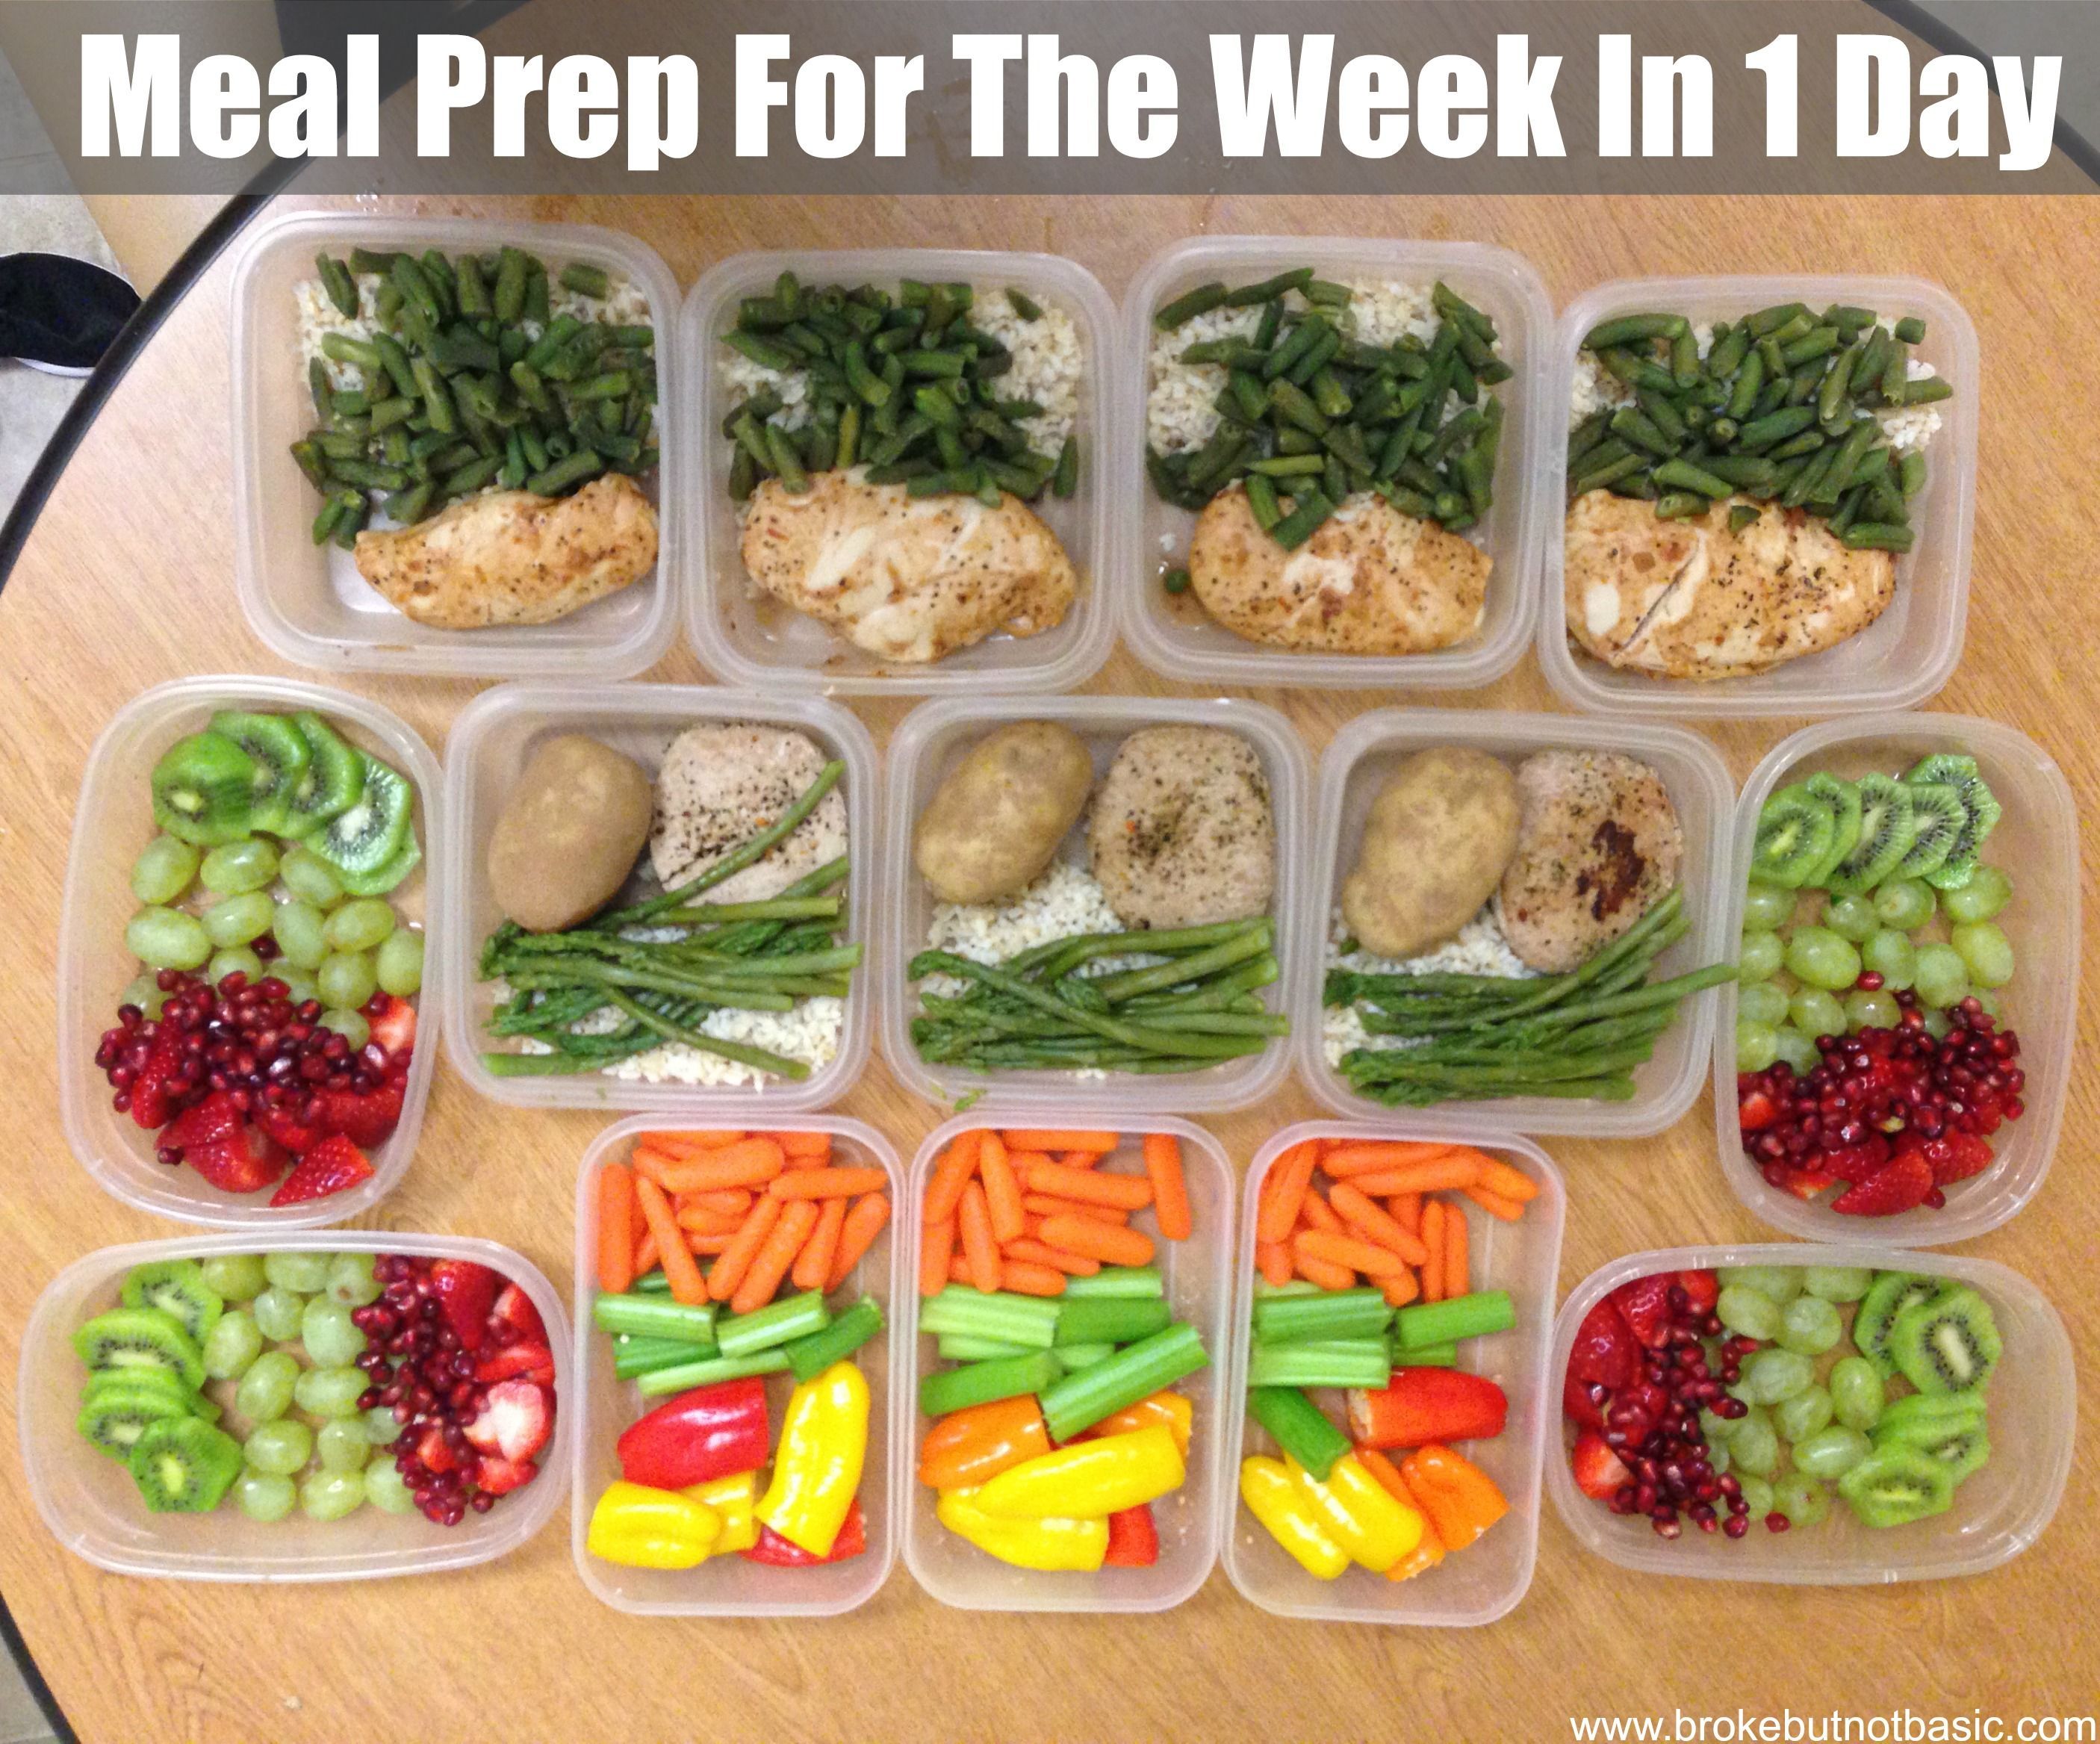 Meal Prep 101: Meal Prep For The Week In 1 Day | Broke but not Basic